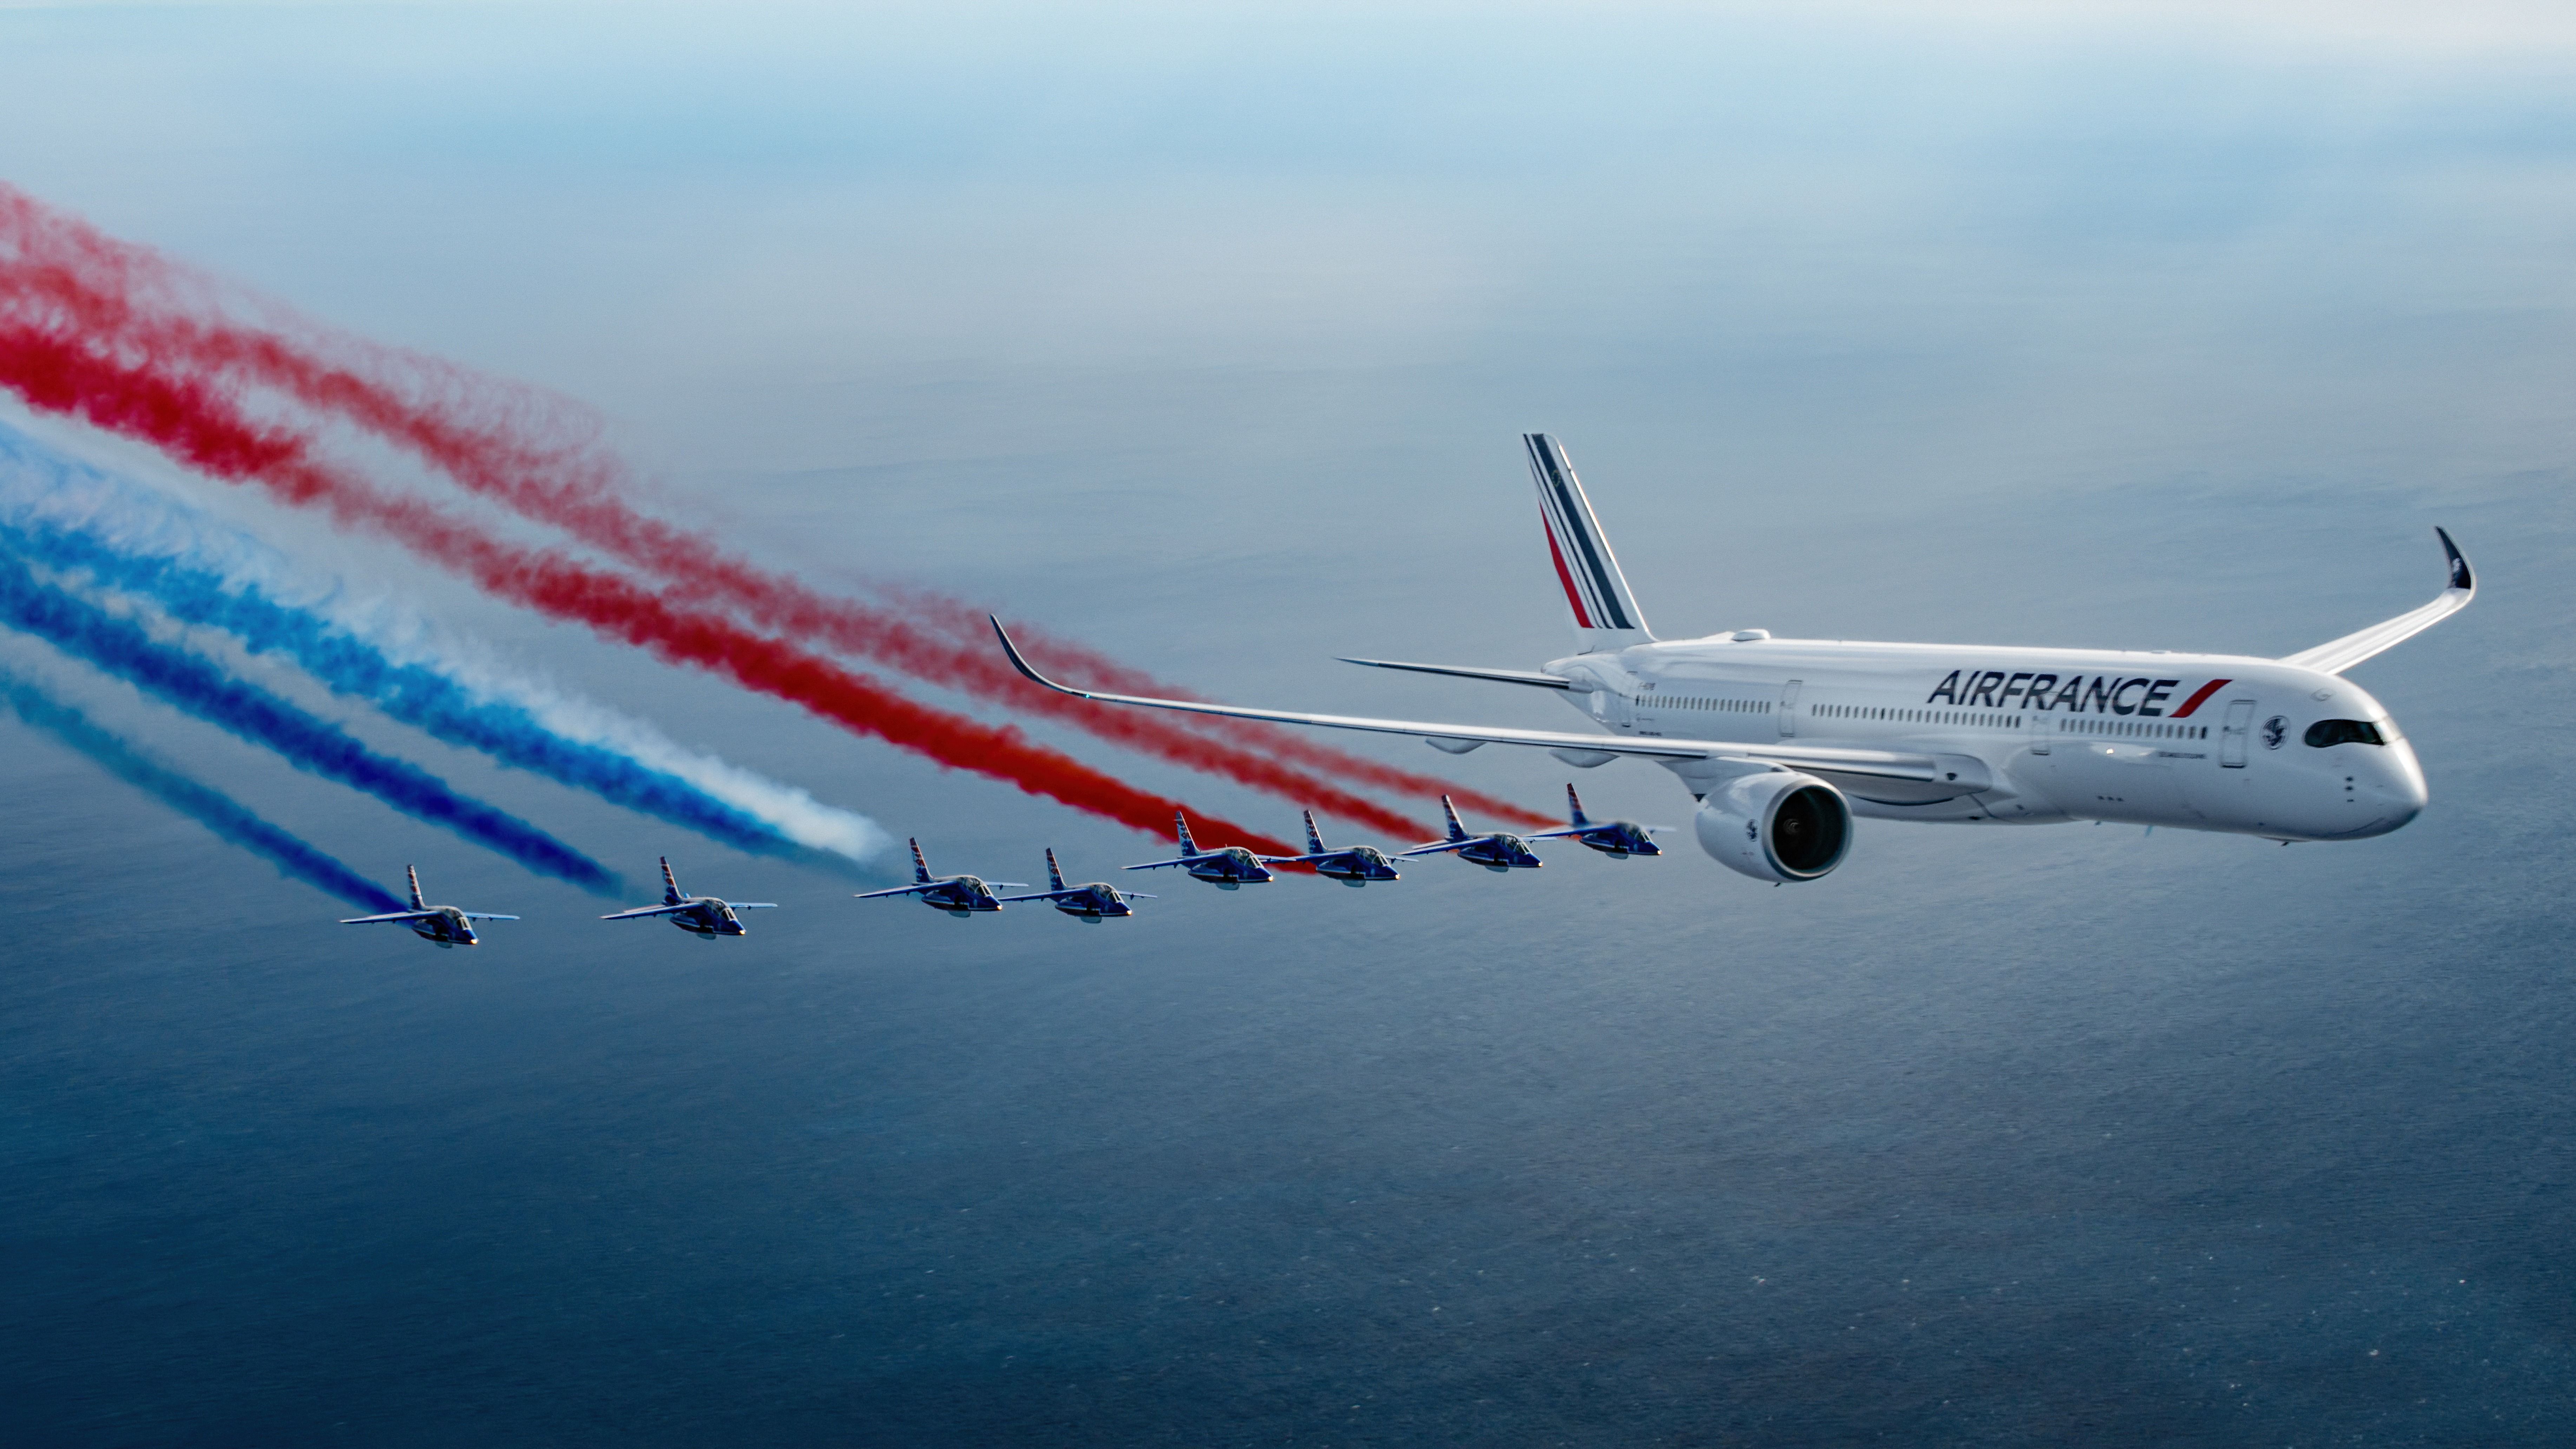 An Air France Airbus A350 flying in front of several fighter jets giving off blue, white, and red smoke.